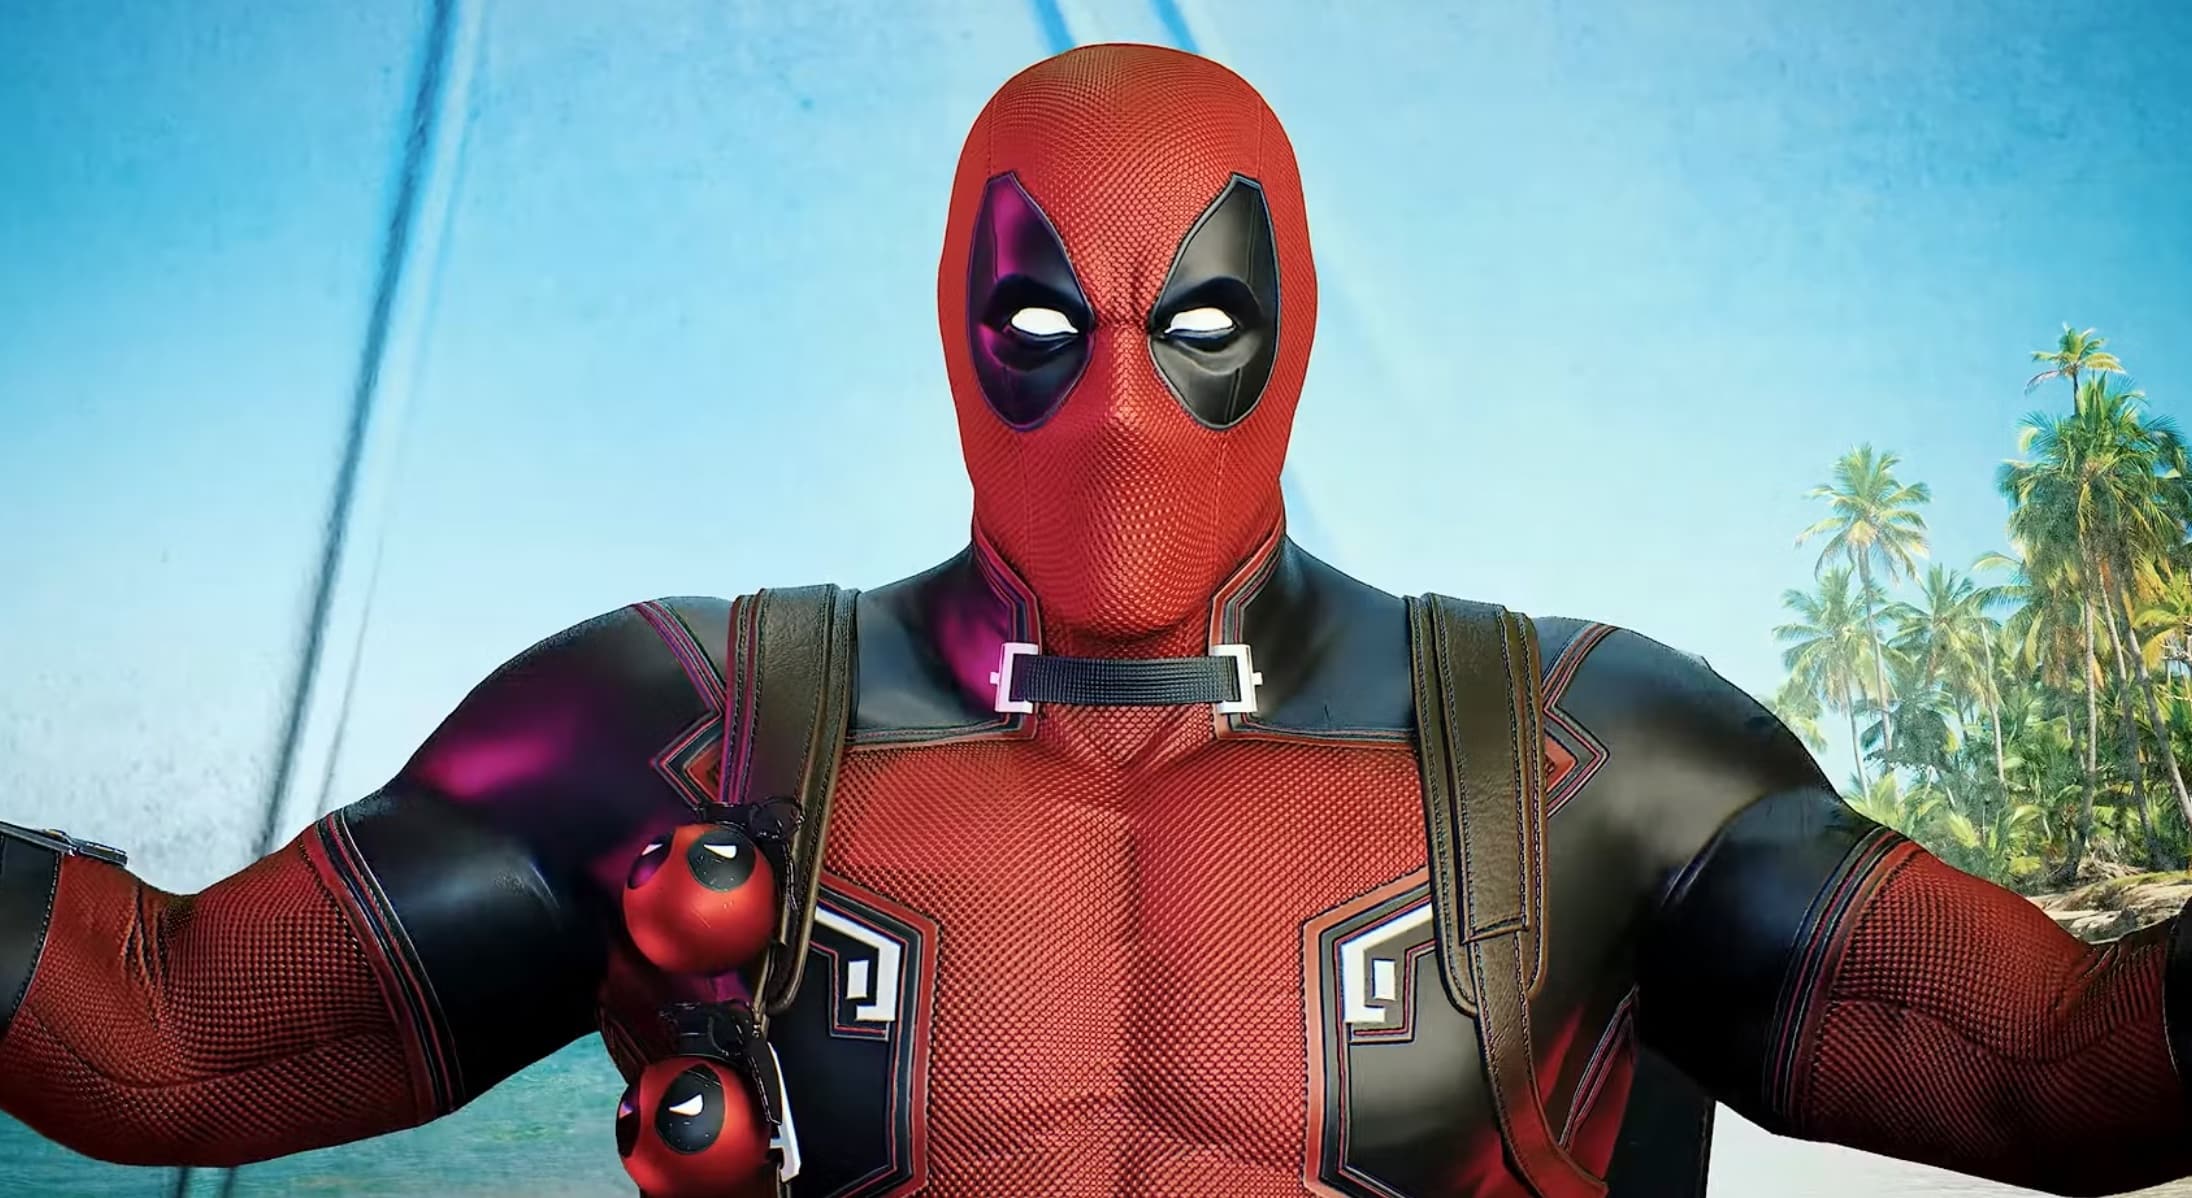 Deadpool is coming to Marvel's Midnight Suns, but only in the season pass